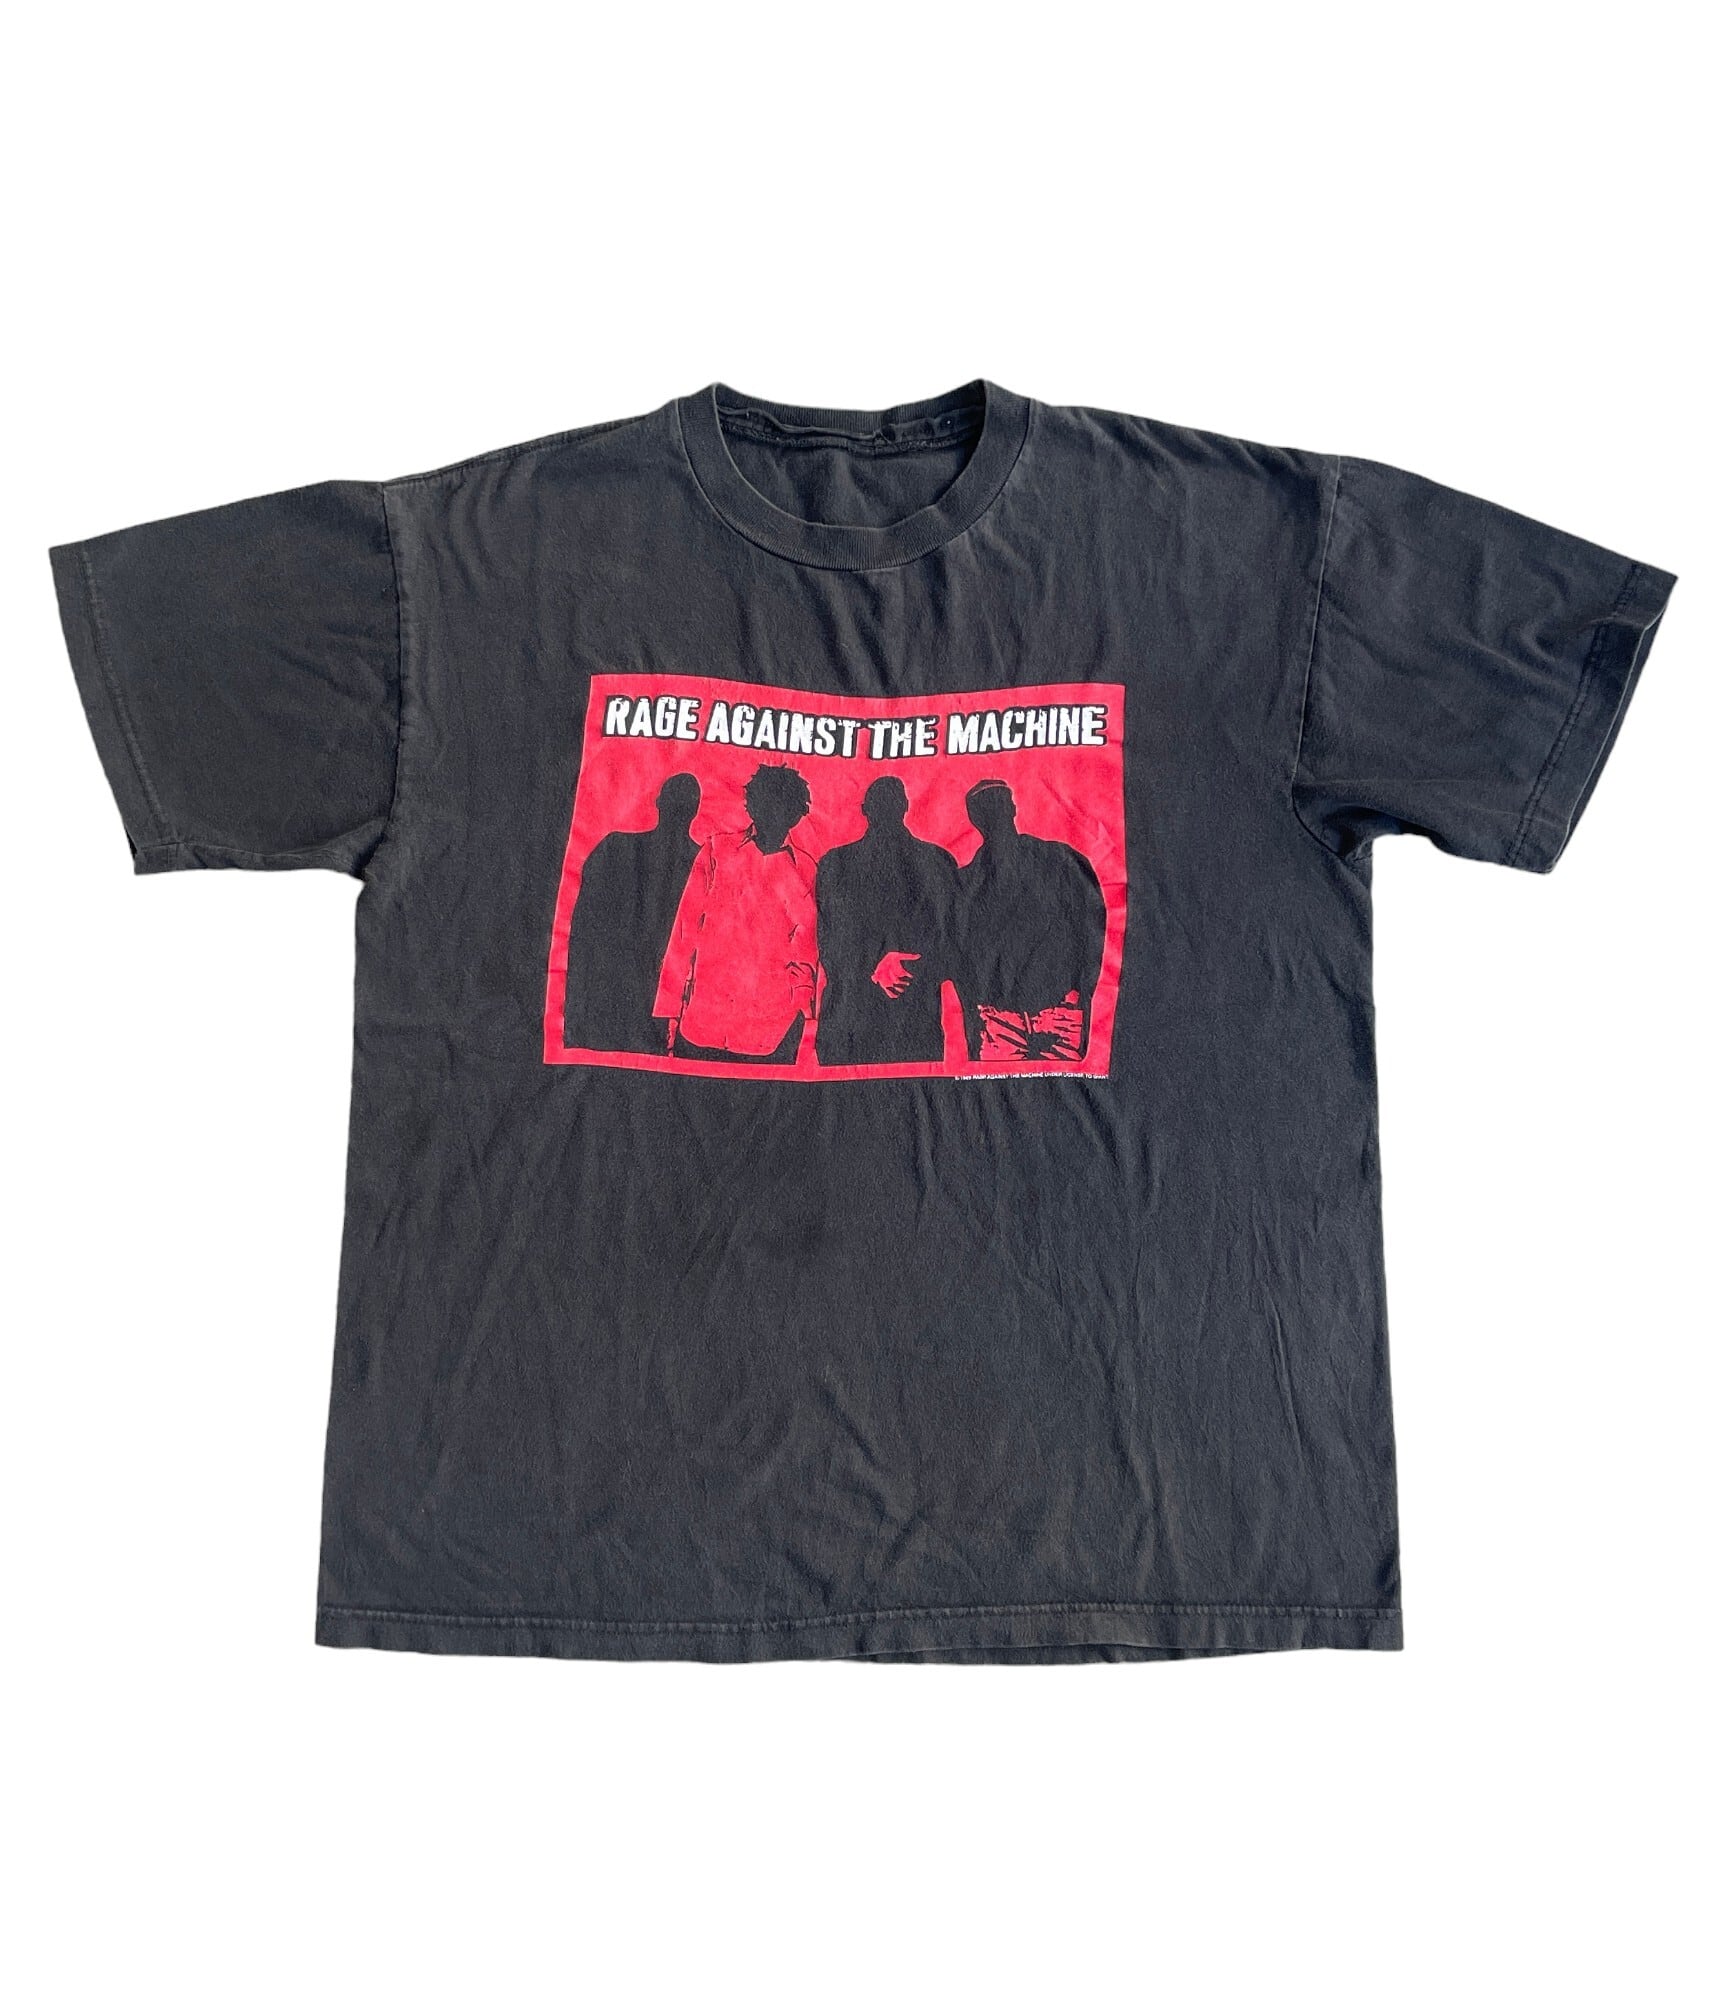 90s RAGE AGAINST THE MACHINE Tシャツ ヴィンテージvintage